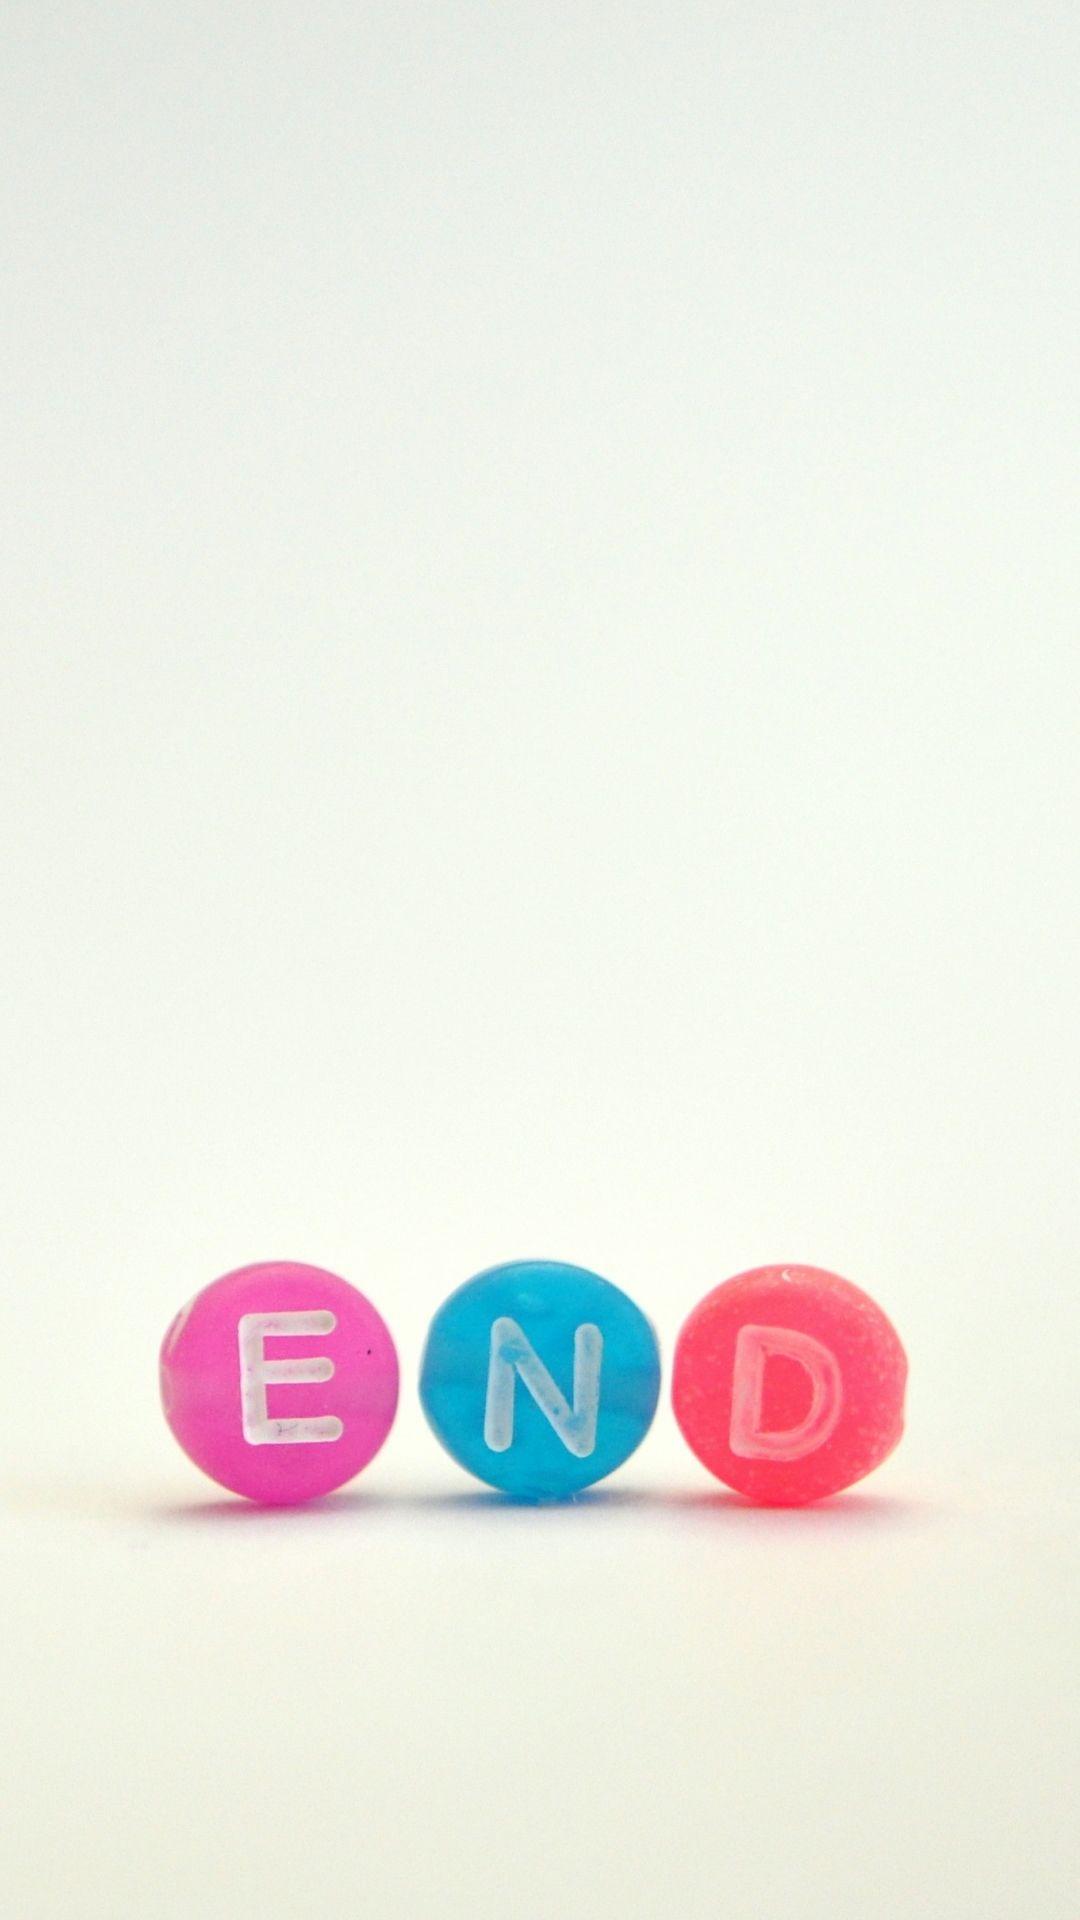 The End Candy iPhone 8 Wallpaper Download. iPhone Wallpaper, iPad